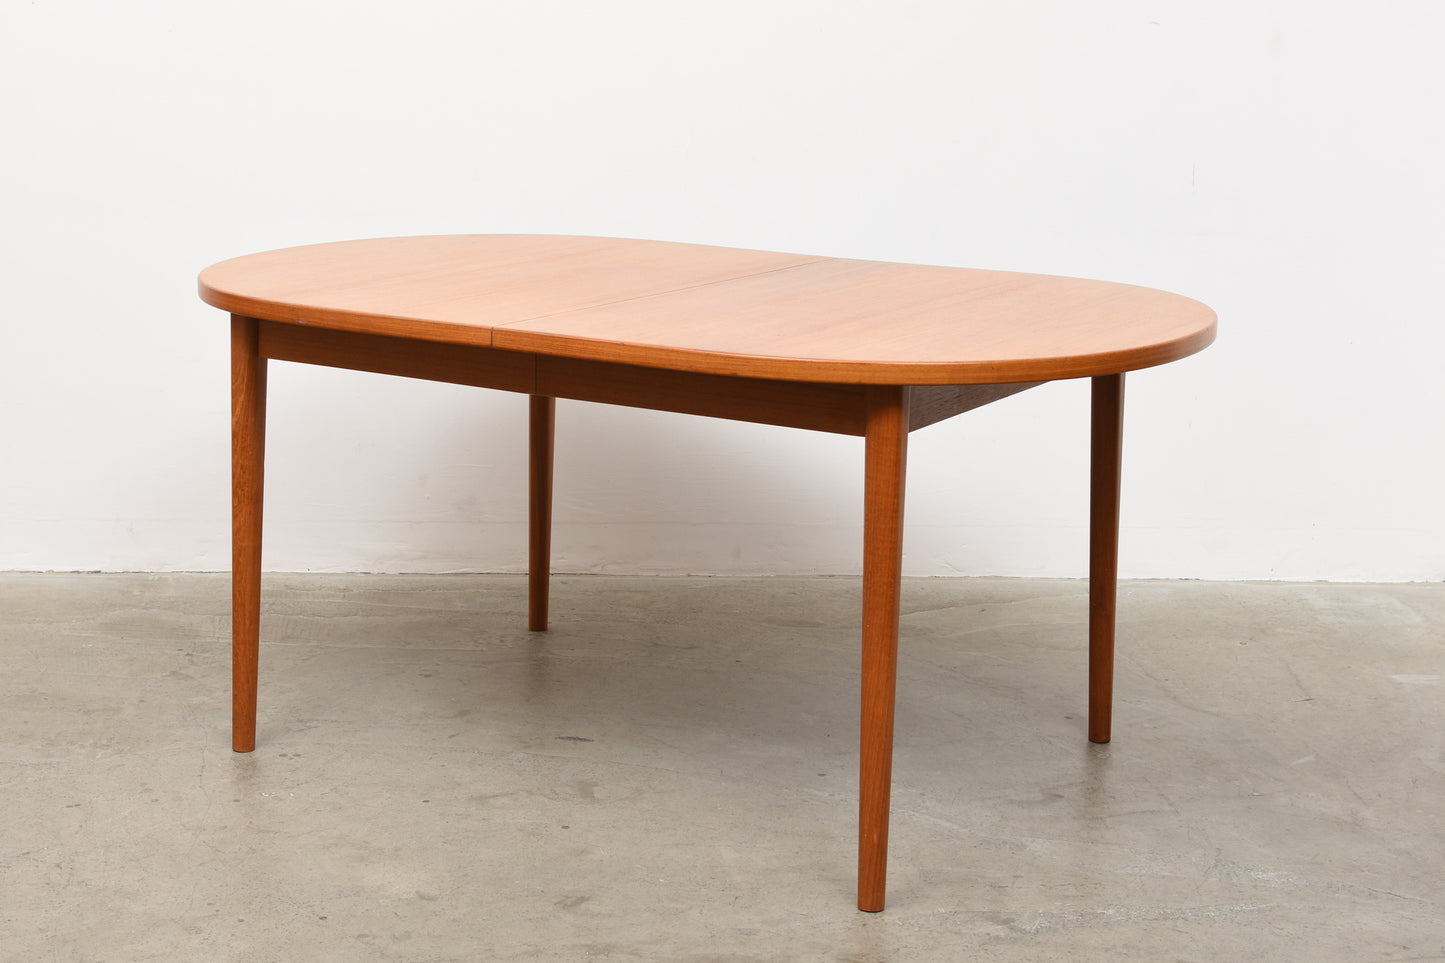 'Ove' dining table by Nils Jonsson